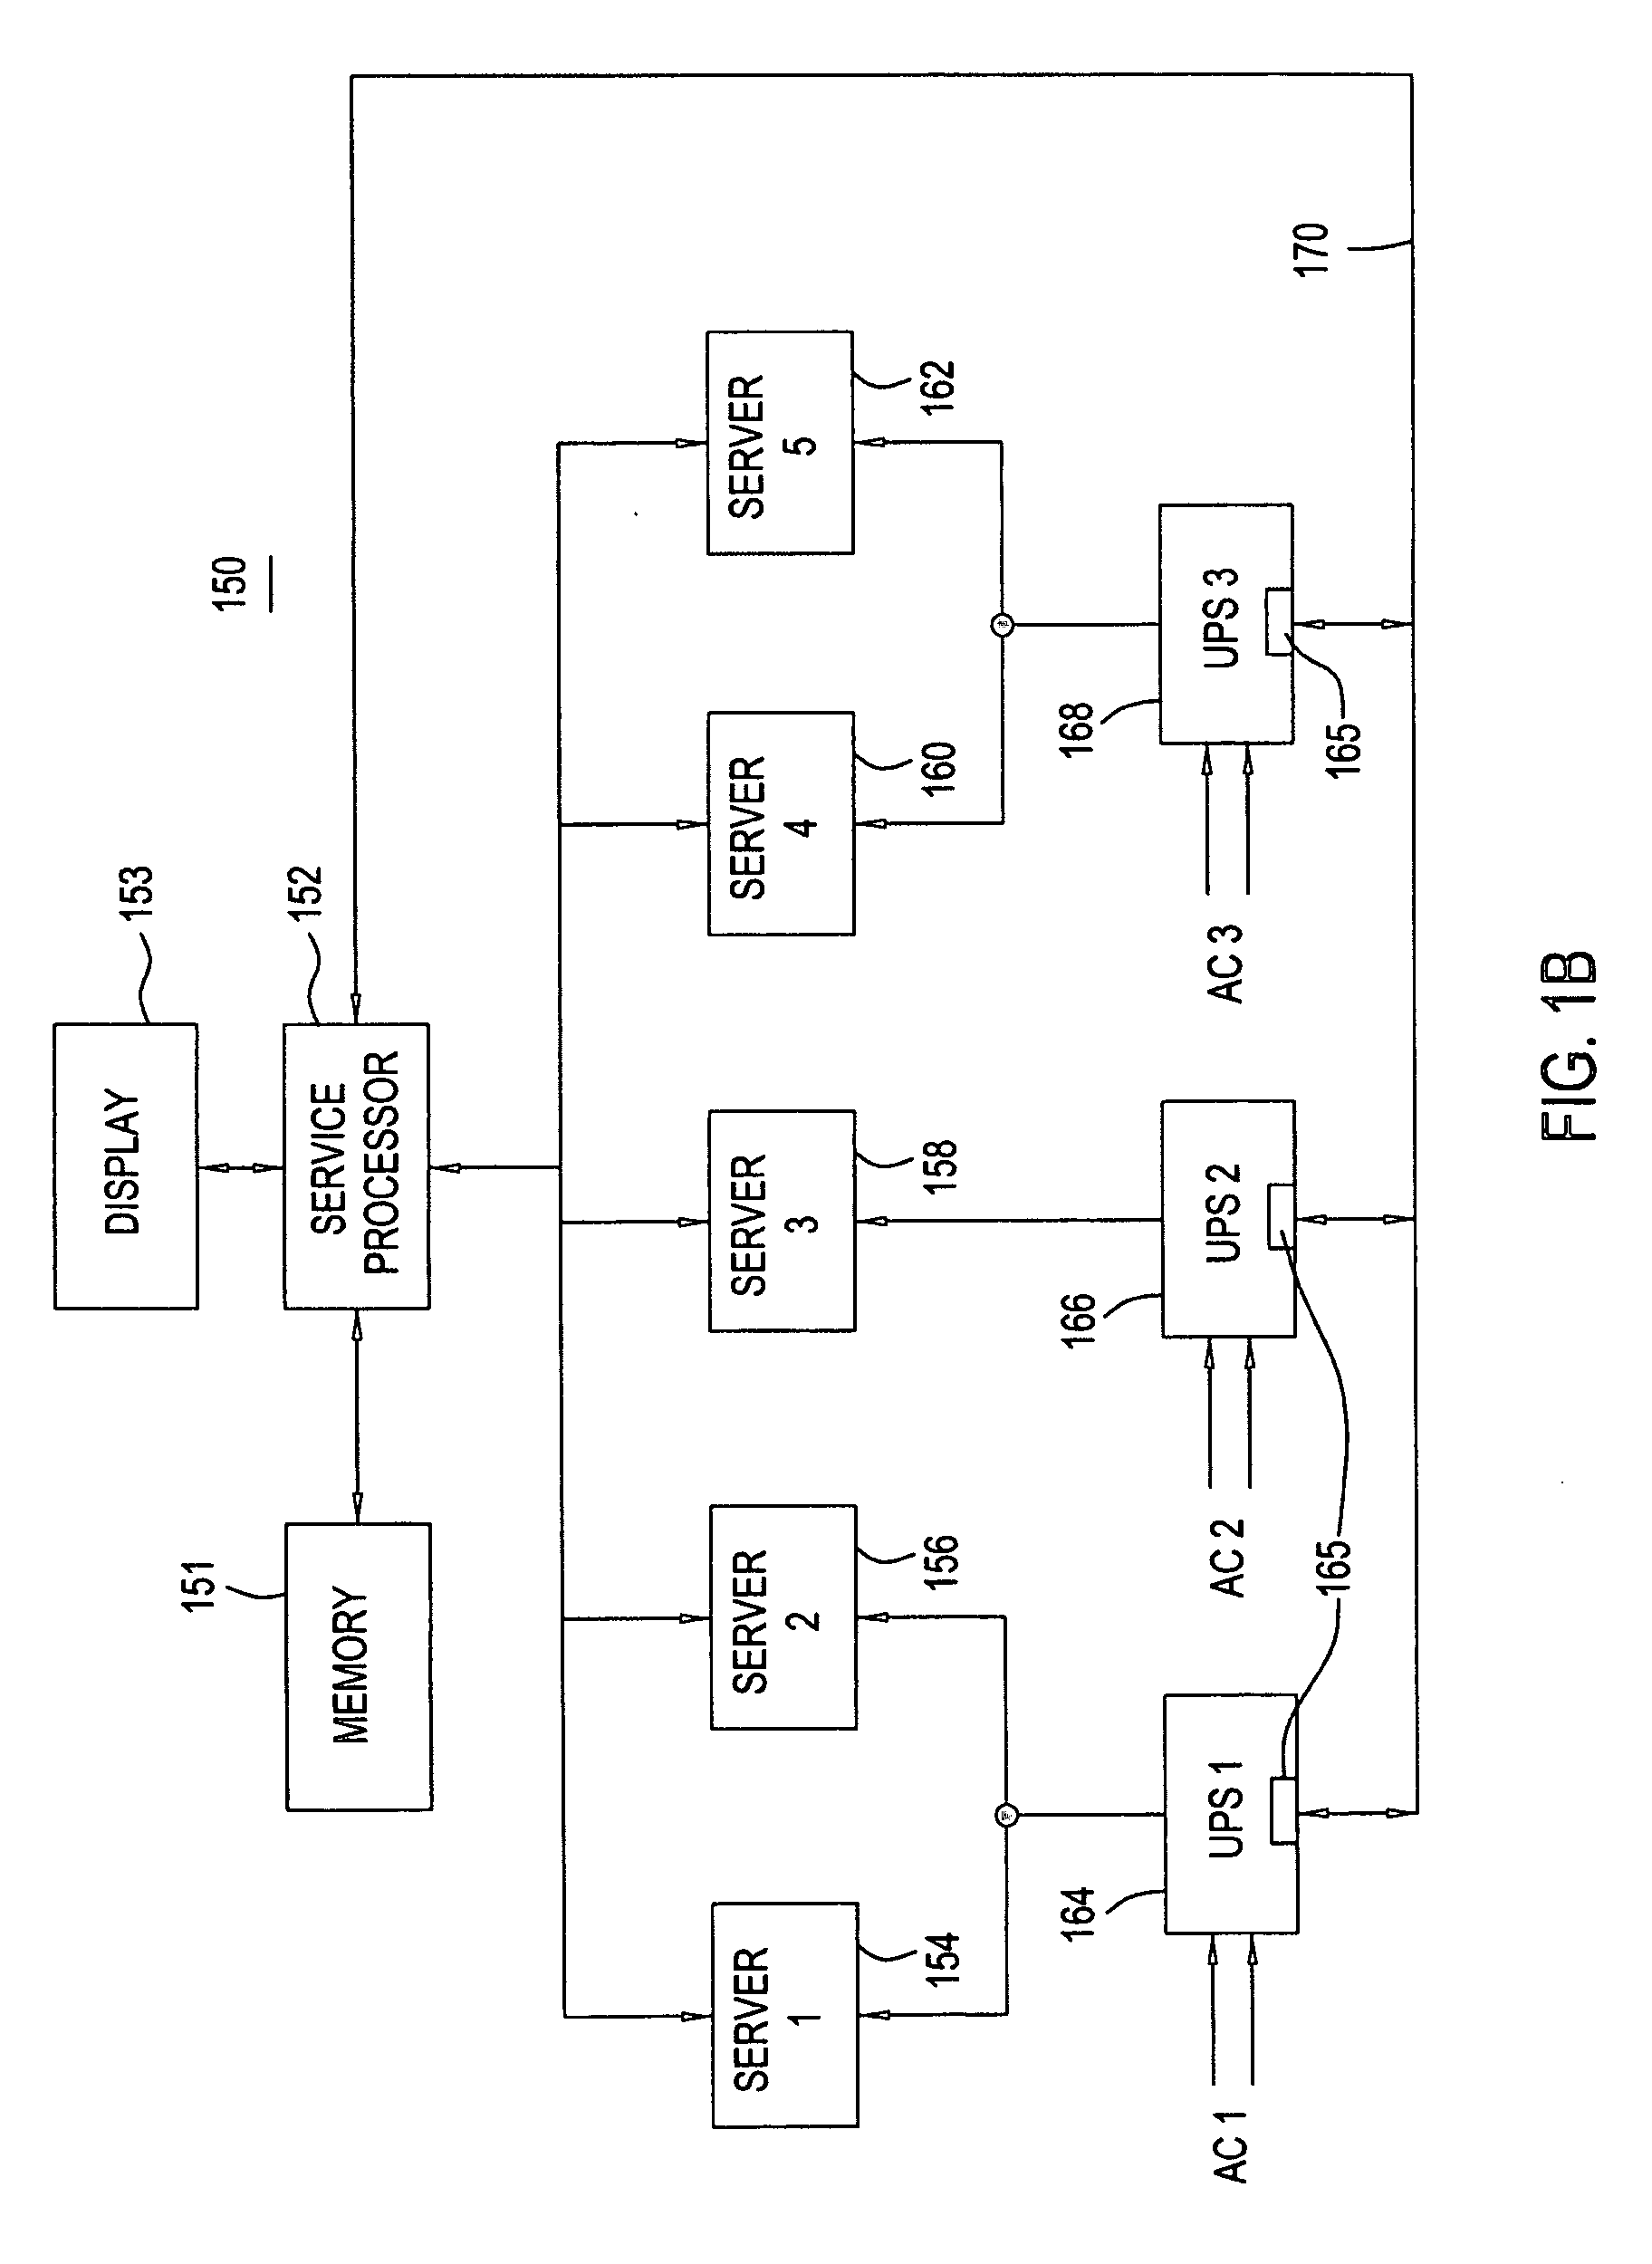 Method and apparatus for correlating UPS capacity to system power requirements